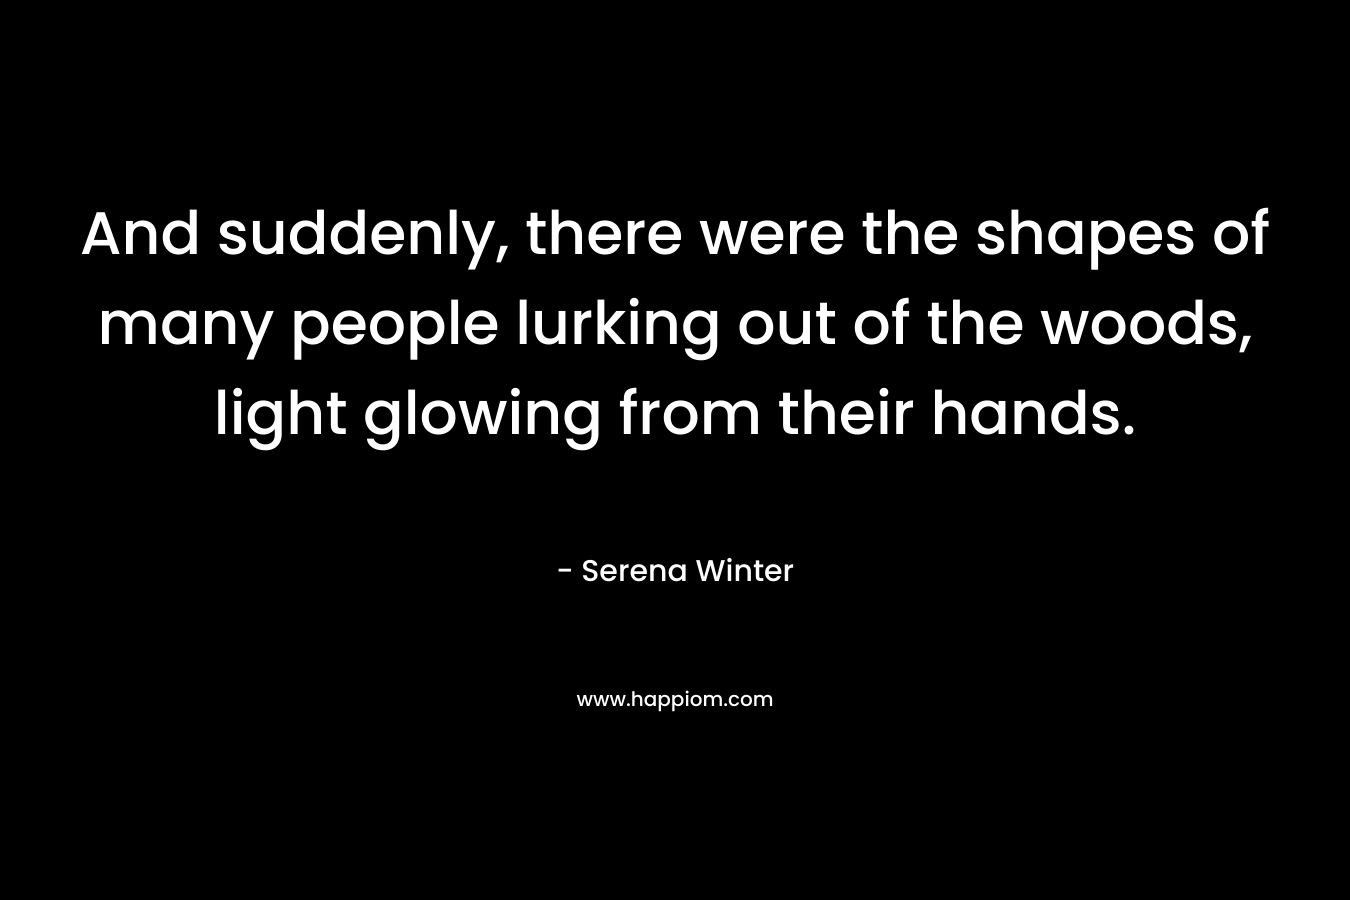 And suddenly, there were the shapes of many people lurking out of the woods, light glowing from their hands.